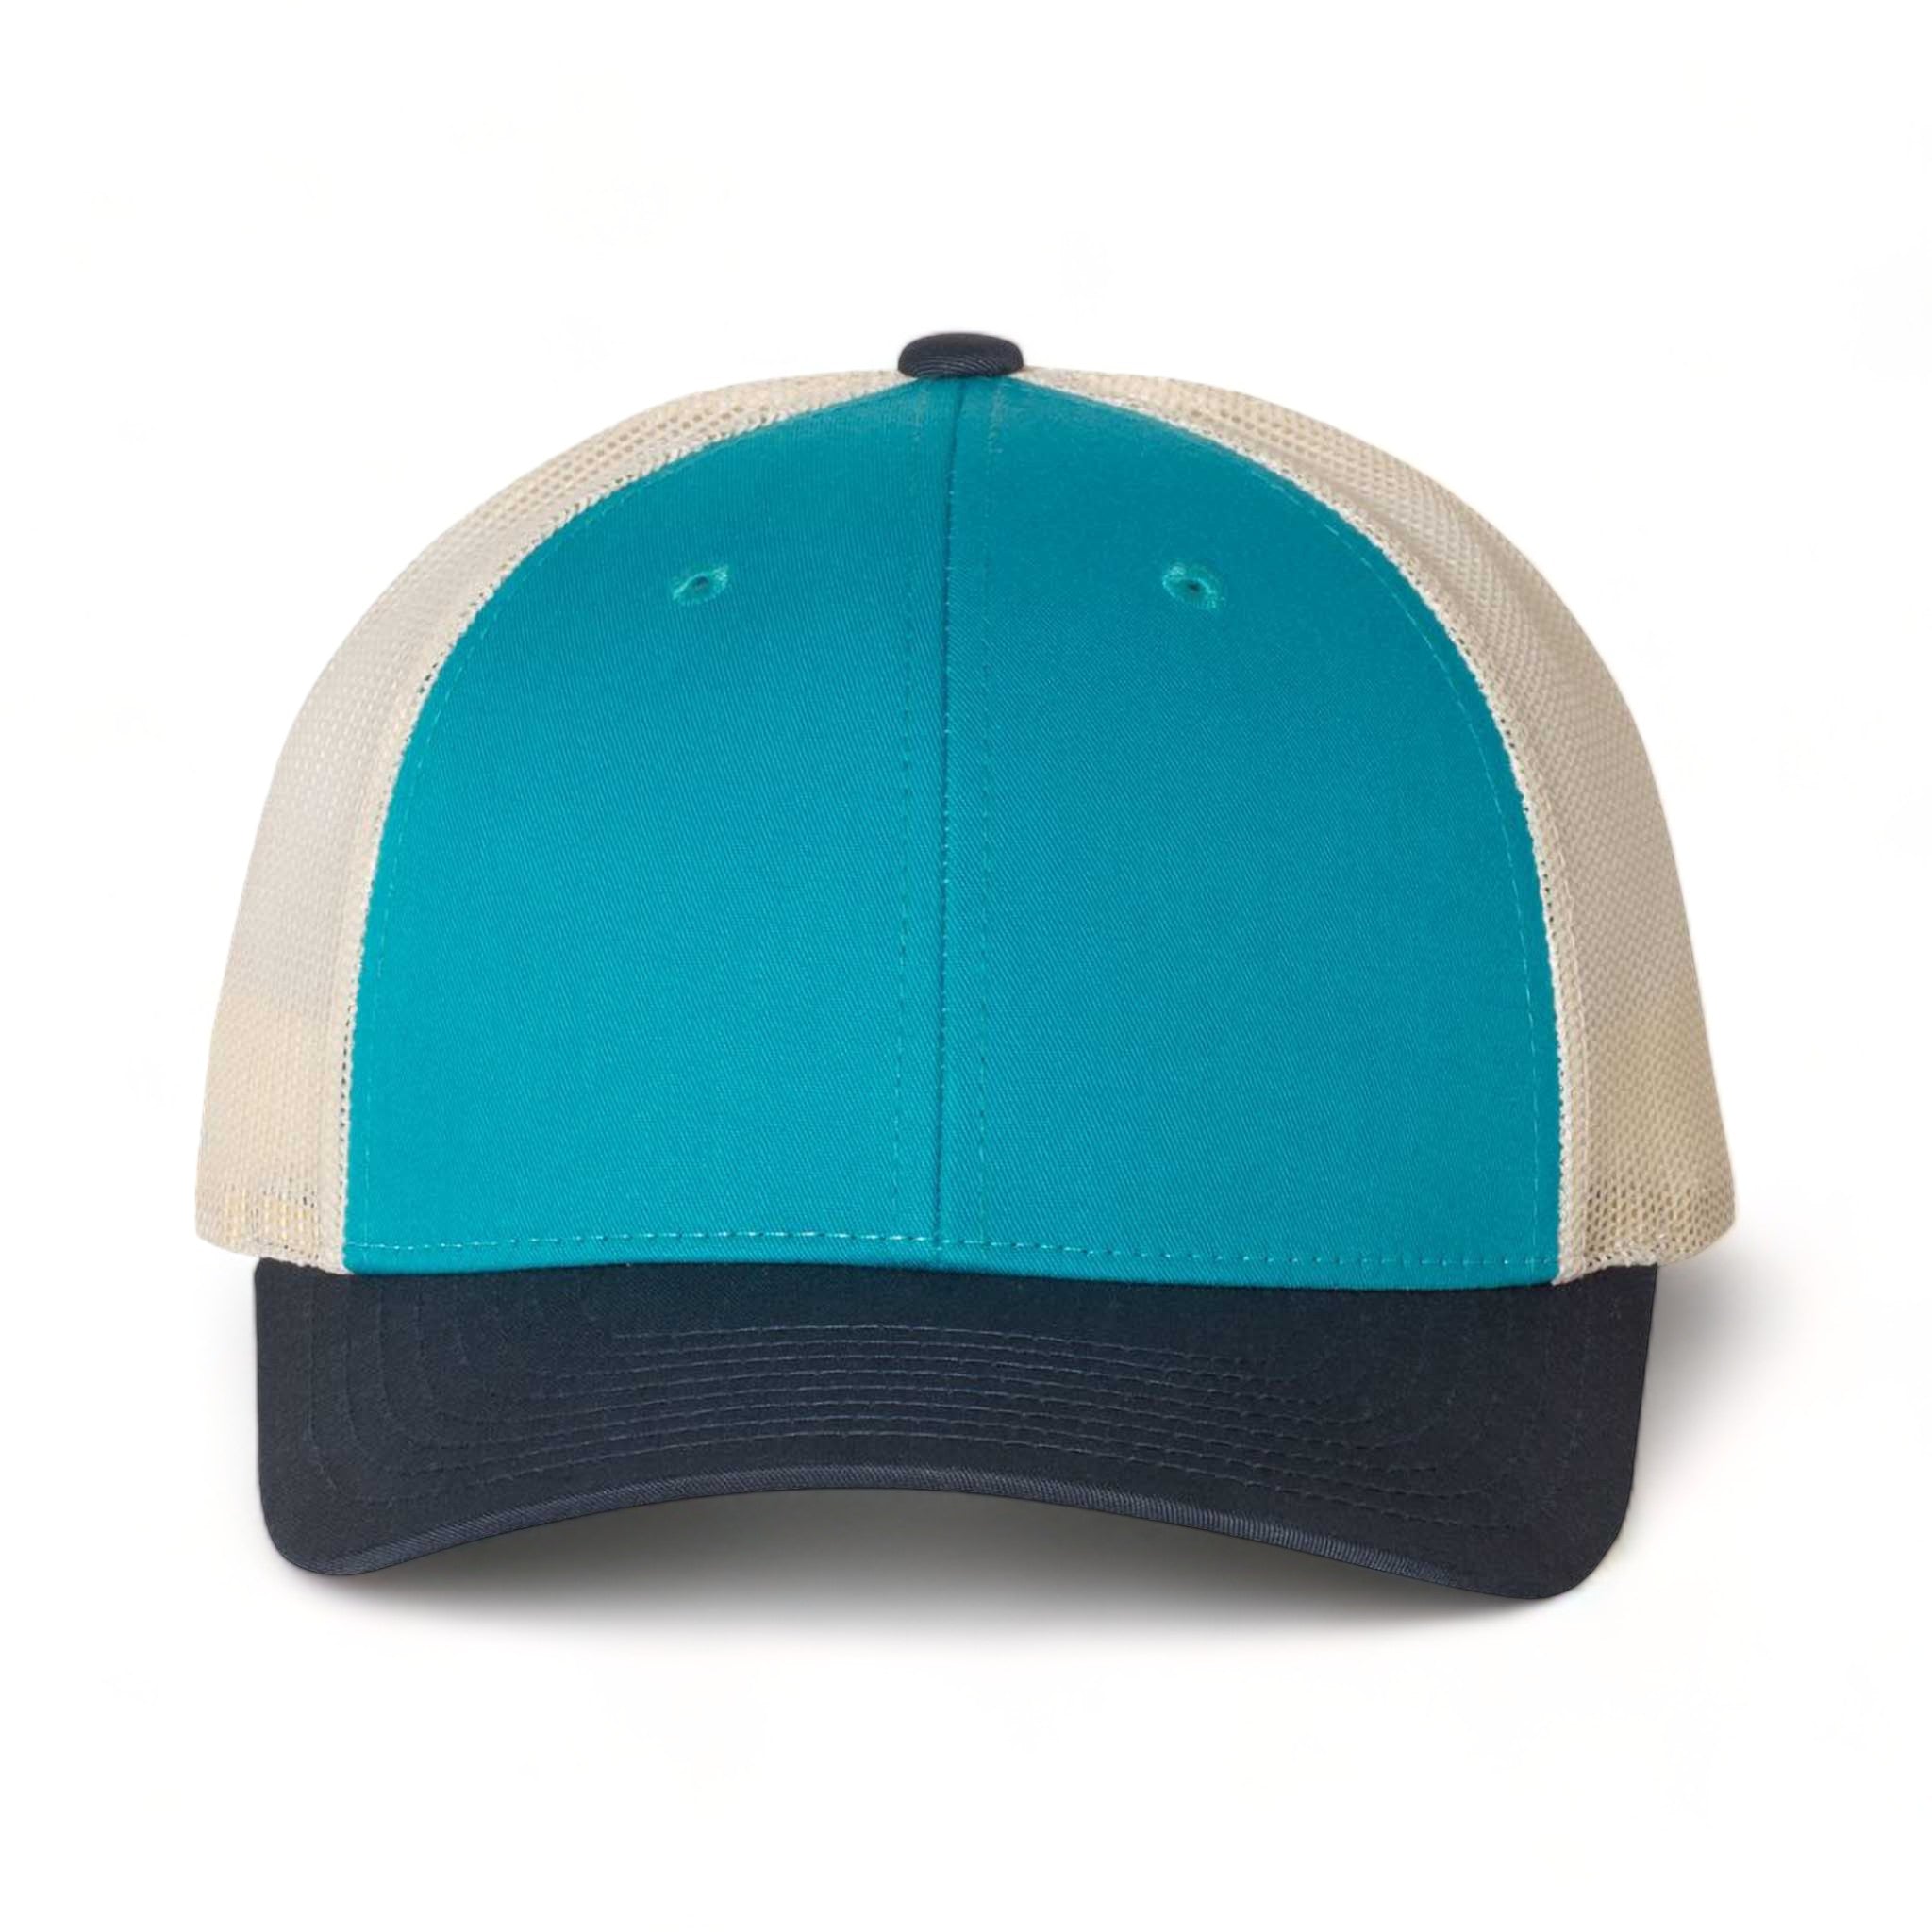 Front view of Richardson 115 custom hat in blue teal, birch and navy